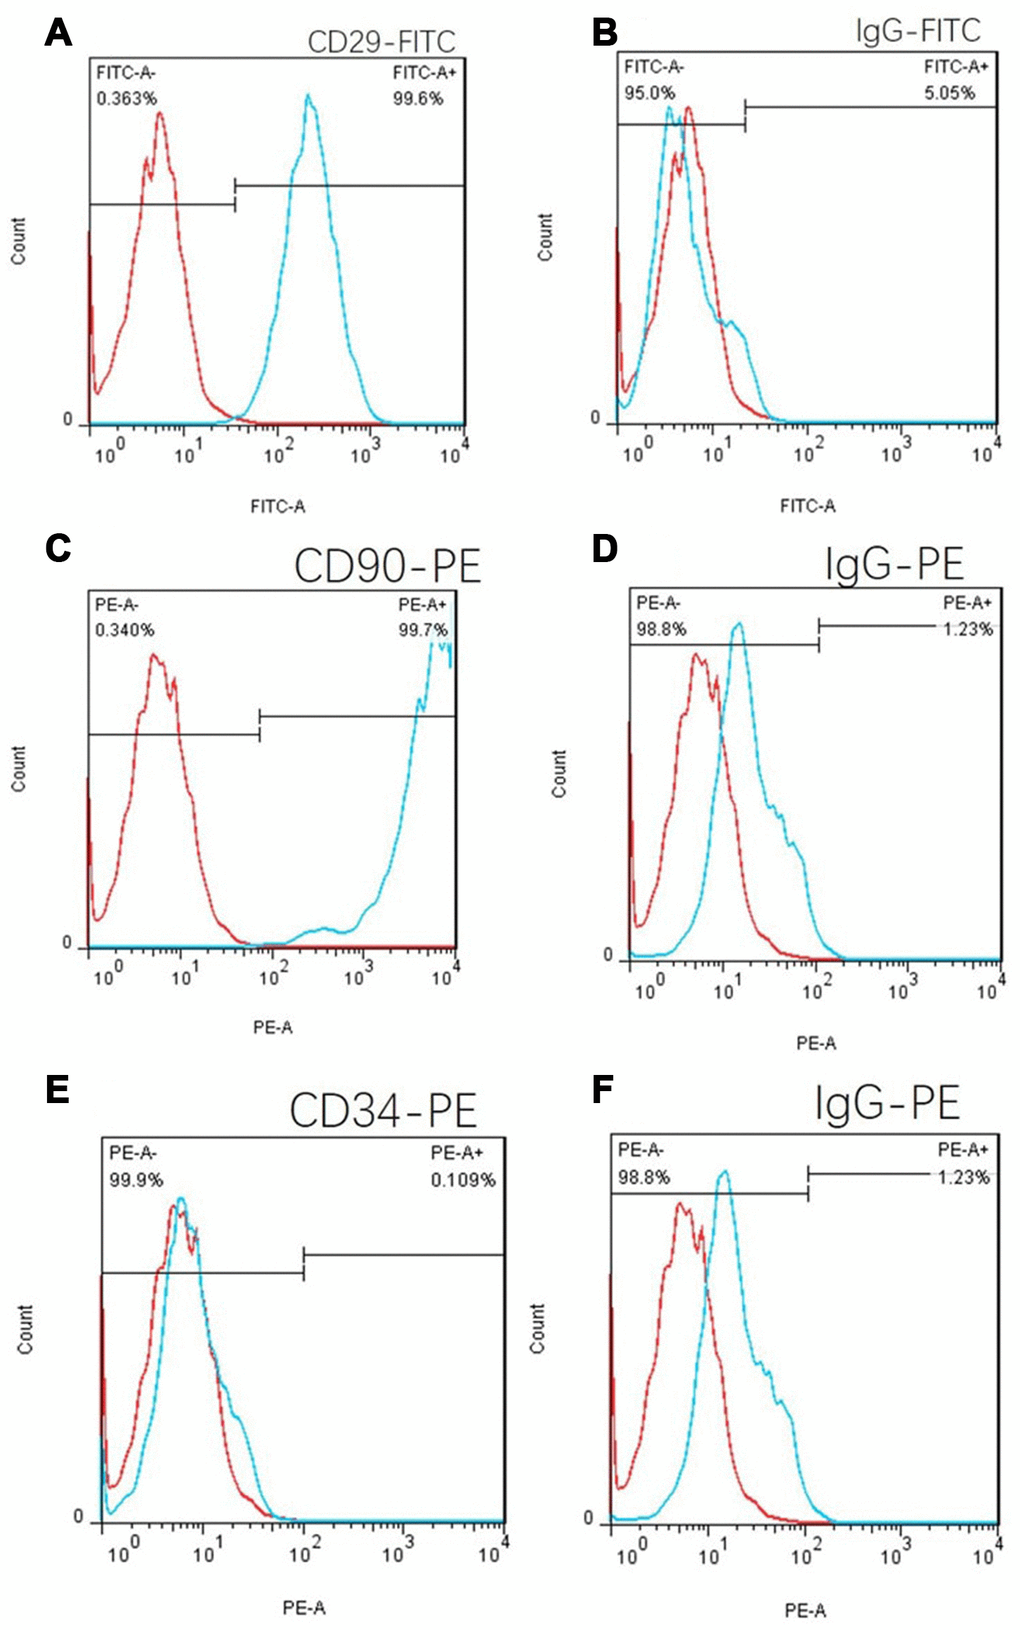 Cell flow phenotypic results of the adherent culture of umbilical cord tissue in C57 mice. (A) The positive rate of CD29 was 99.6%. (B) FITC isotype control. (C) The CD90 positive rate was 99.7%. (E) The positive rate of CD34 was 0.109%, which is in line with the phenotypic characteristics of mouse mesenchymal stem cells. (D) and (F): PE isotype control.